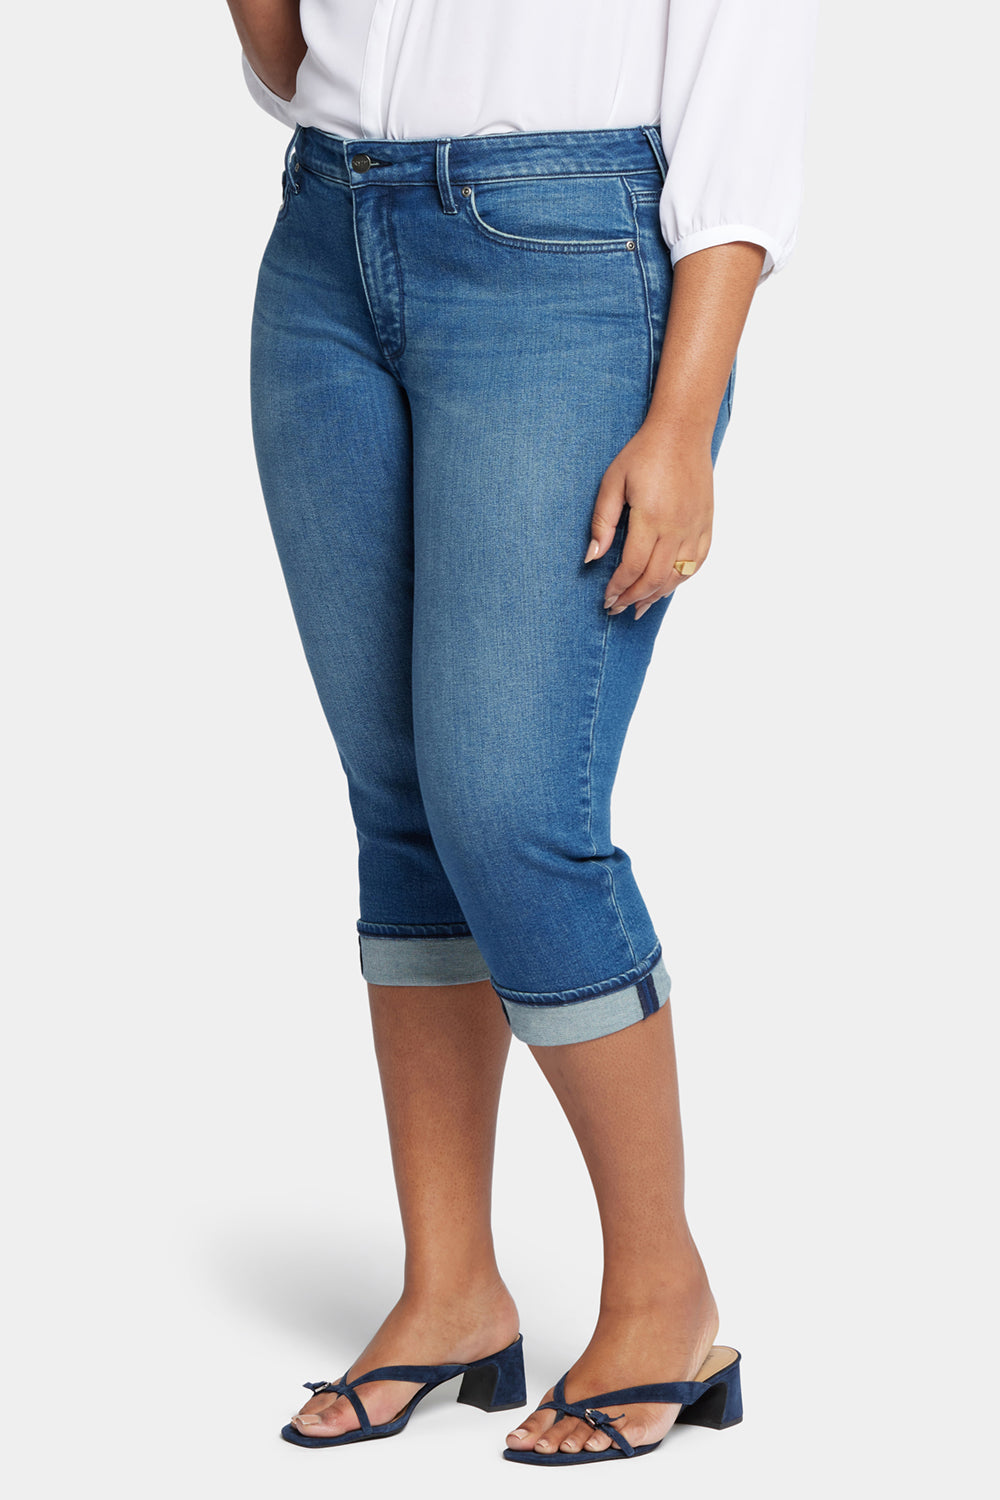 Marilyn Straight Crop Jeans In Plus Size With Cuffs - Windfall Blue | NYDJ | High Waist Jeans